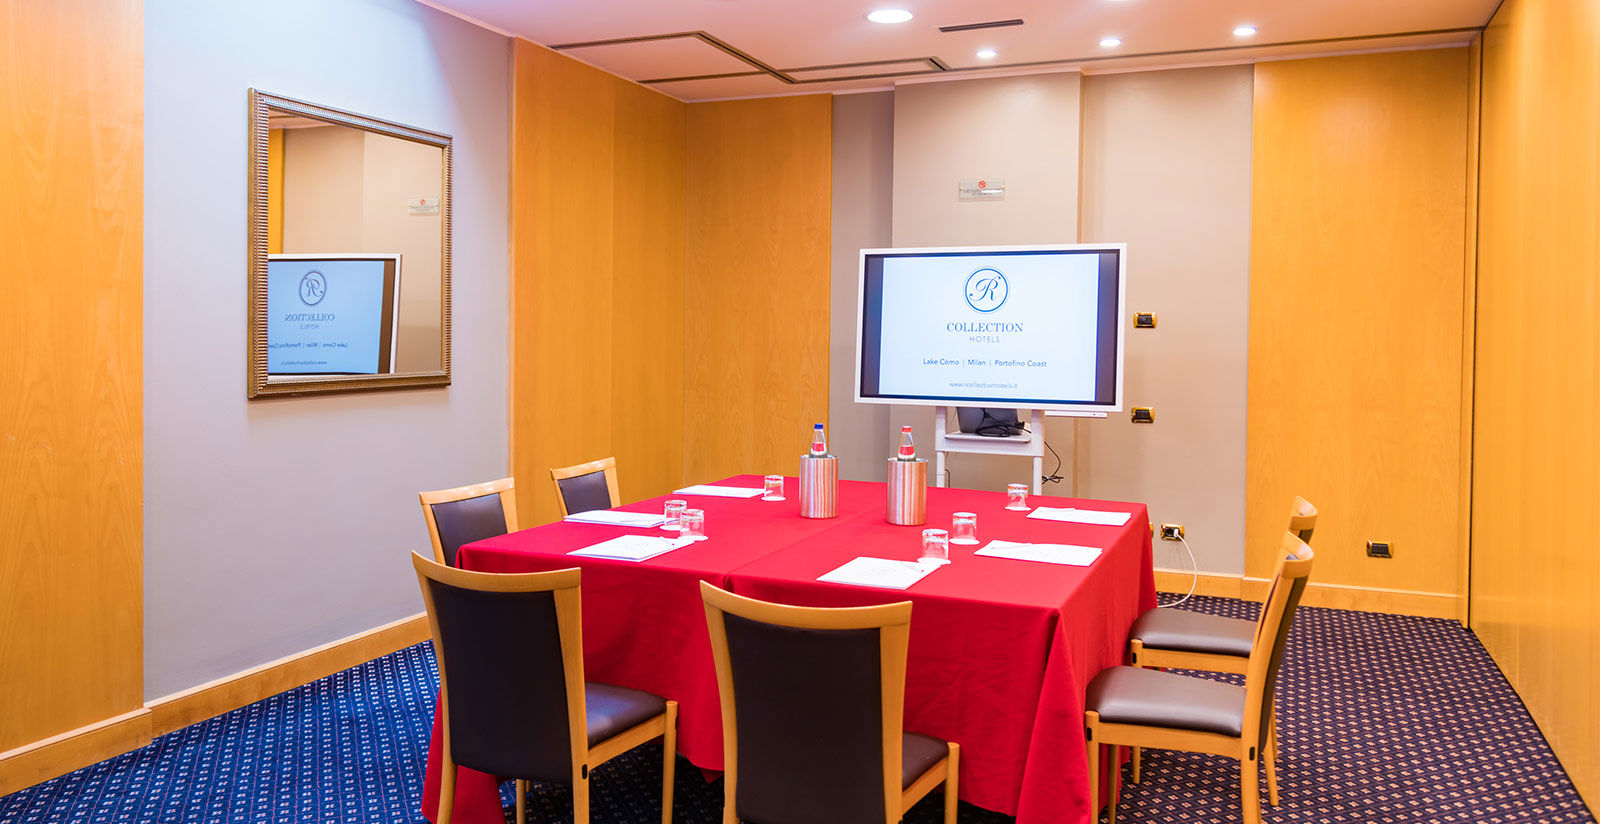 City Life Poliziano - 4-star hotel with meeting and conference rooms in Citylife Milan 6